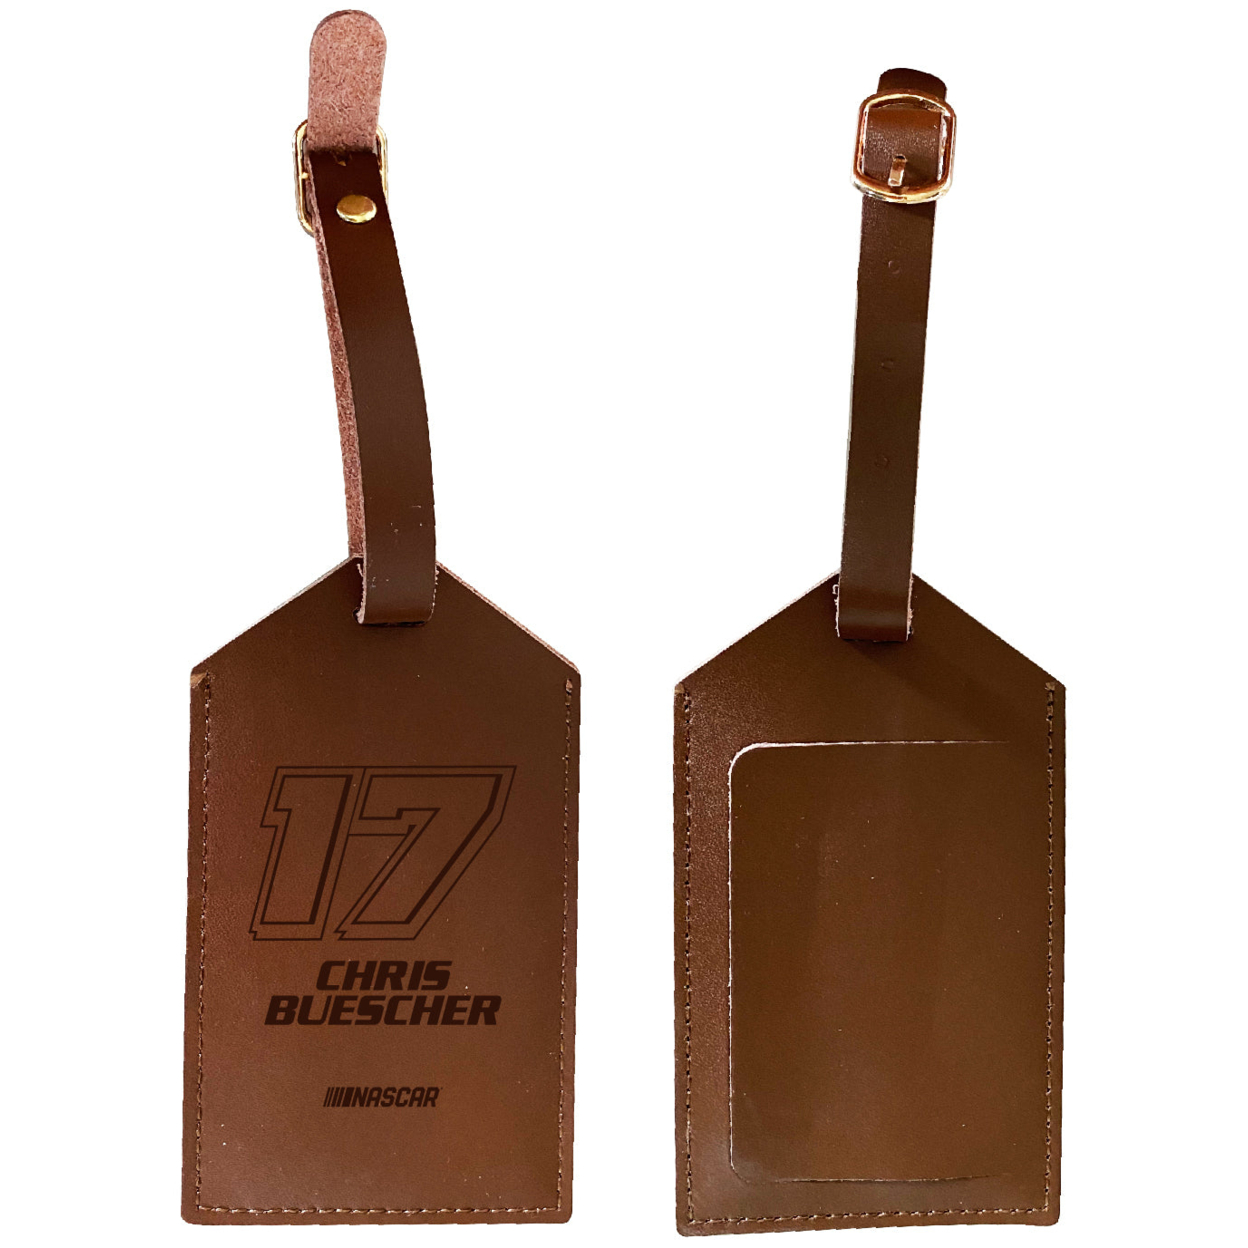 Nascar #17 Chris Buescher Leather Luggage Tag Engraved